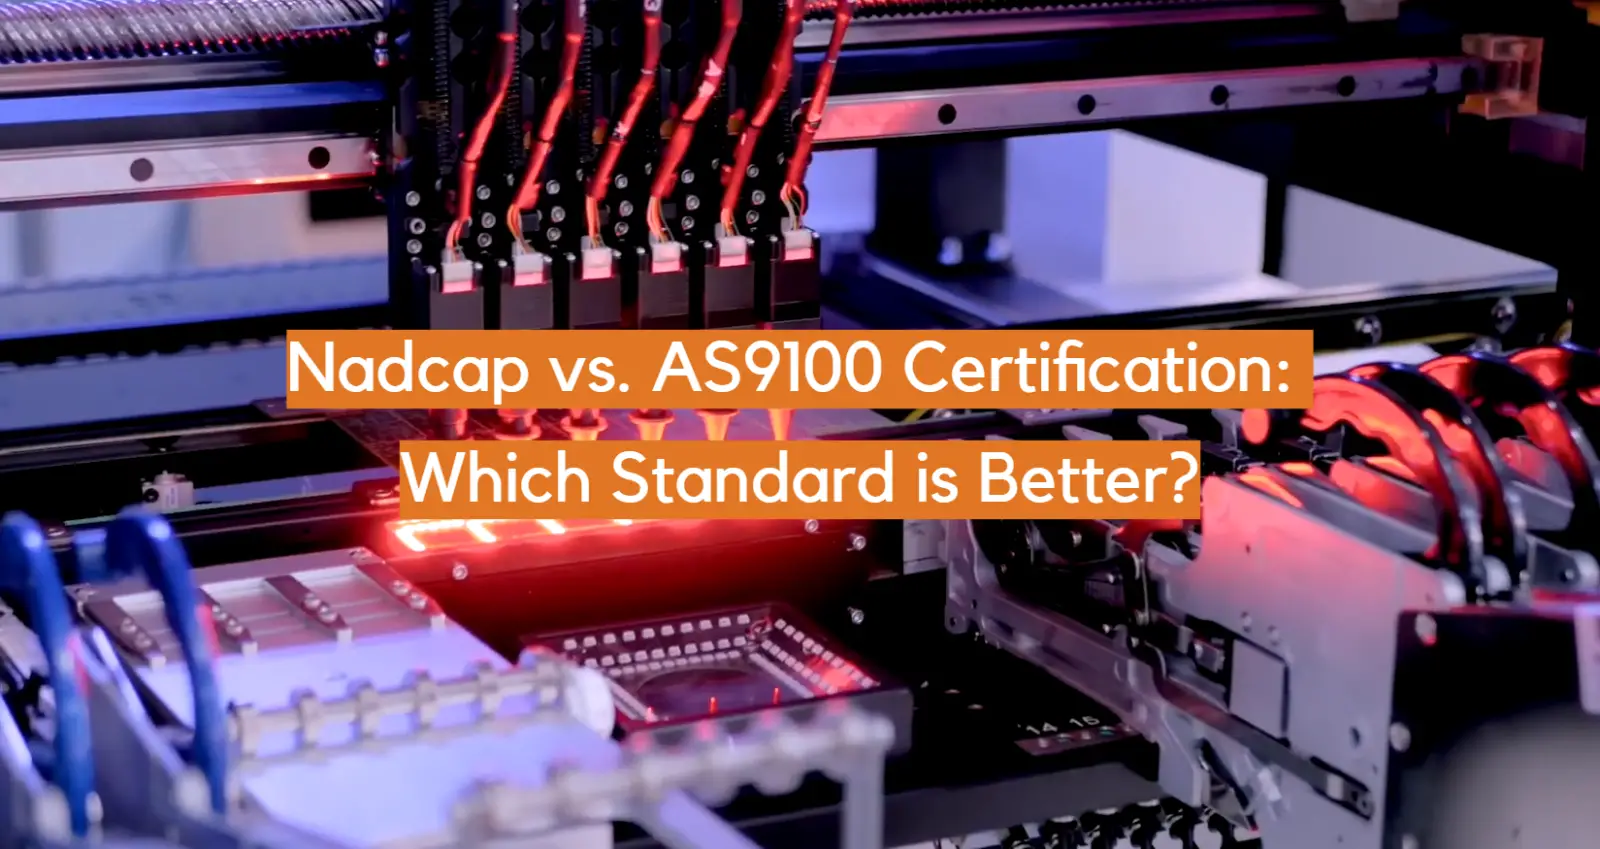 Nadcap vs. AS9100 Certification: Which Standard is Better?